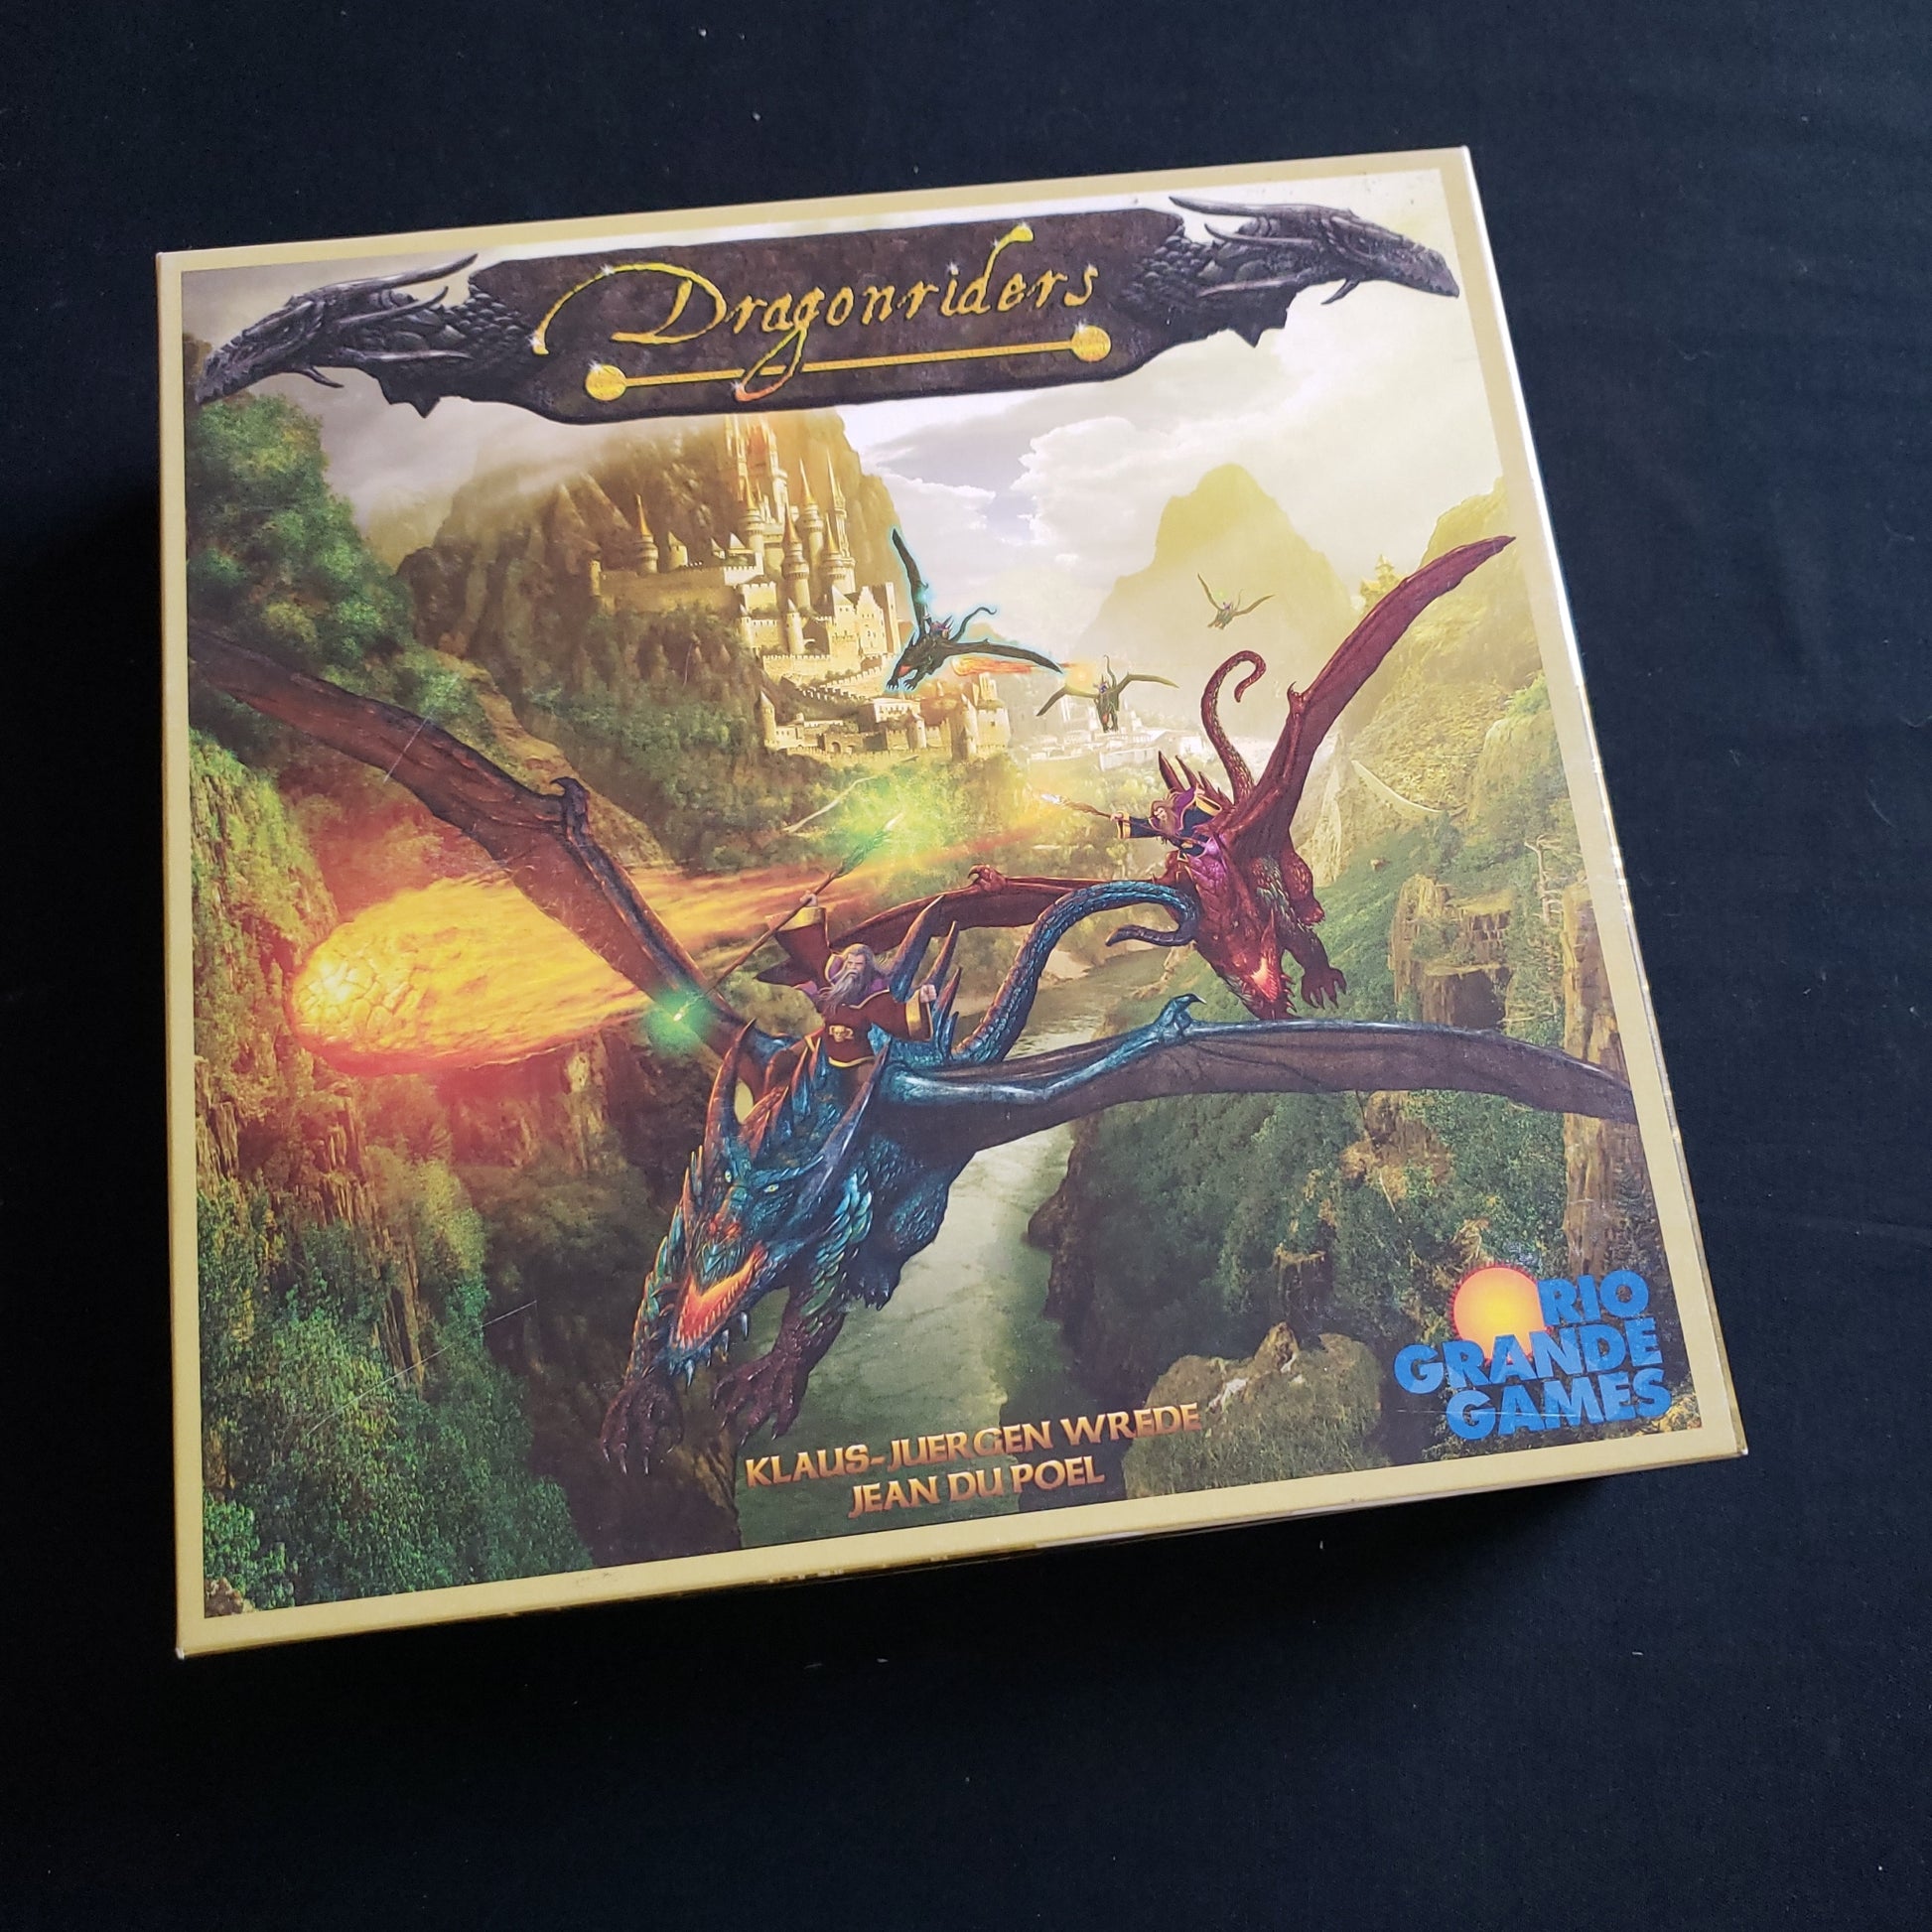 Image shows the front cover of the box of the Dragonriders board game